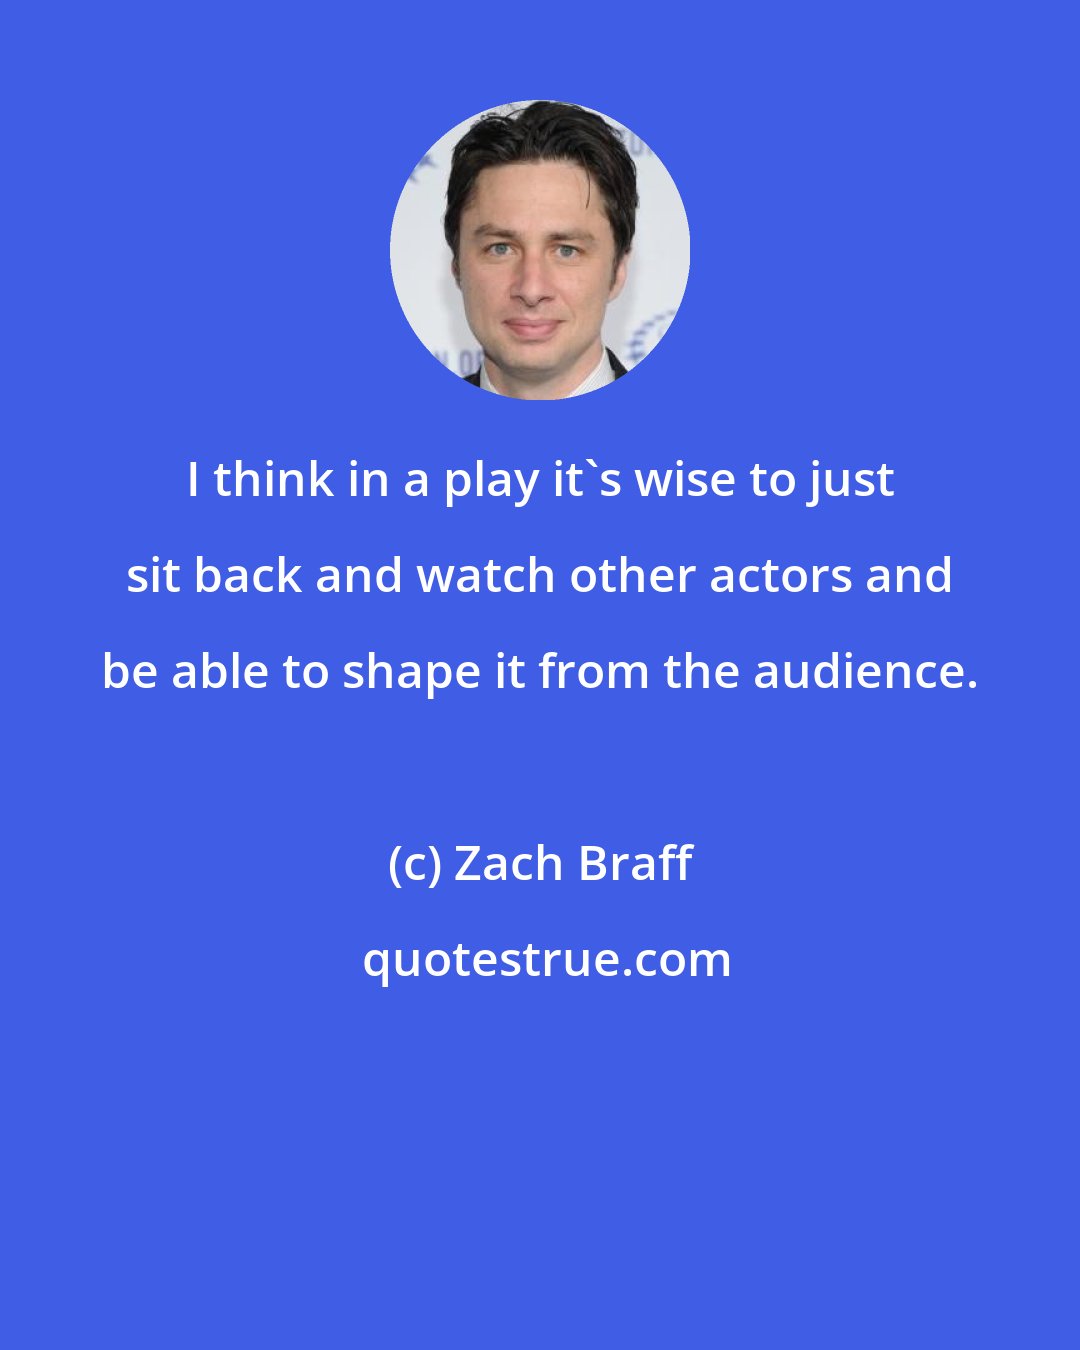 Zach Braff: I think in a play it's wise to just sit back and watch other actors and be able to shape it from the audience.